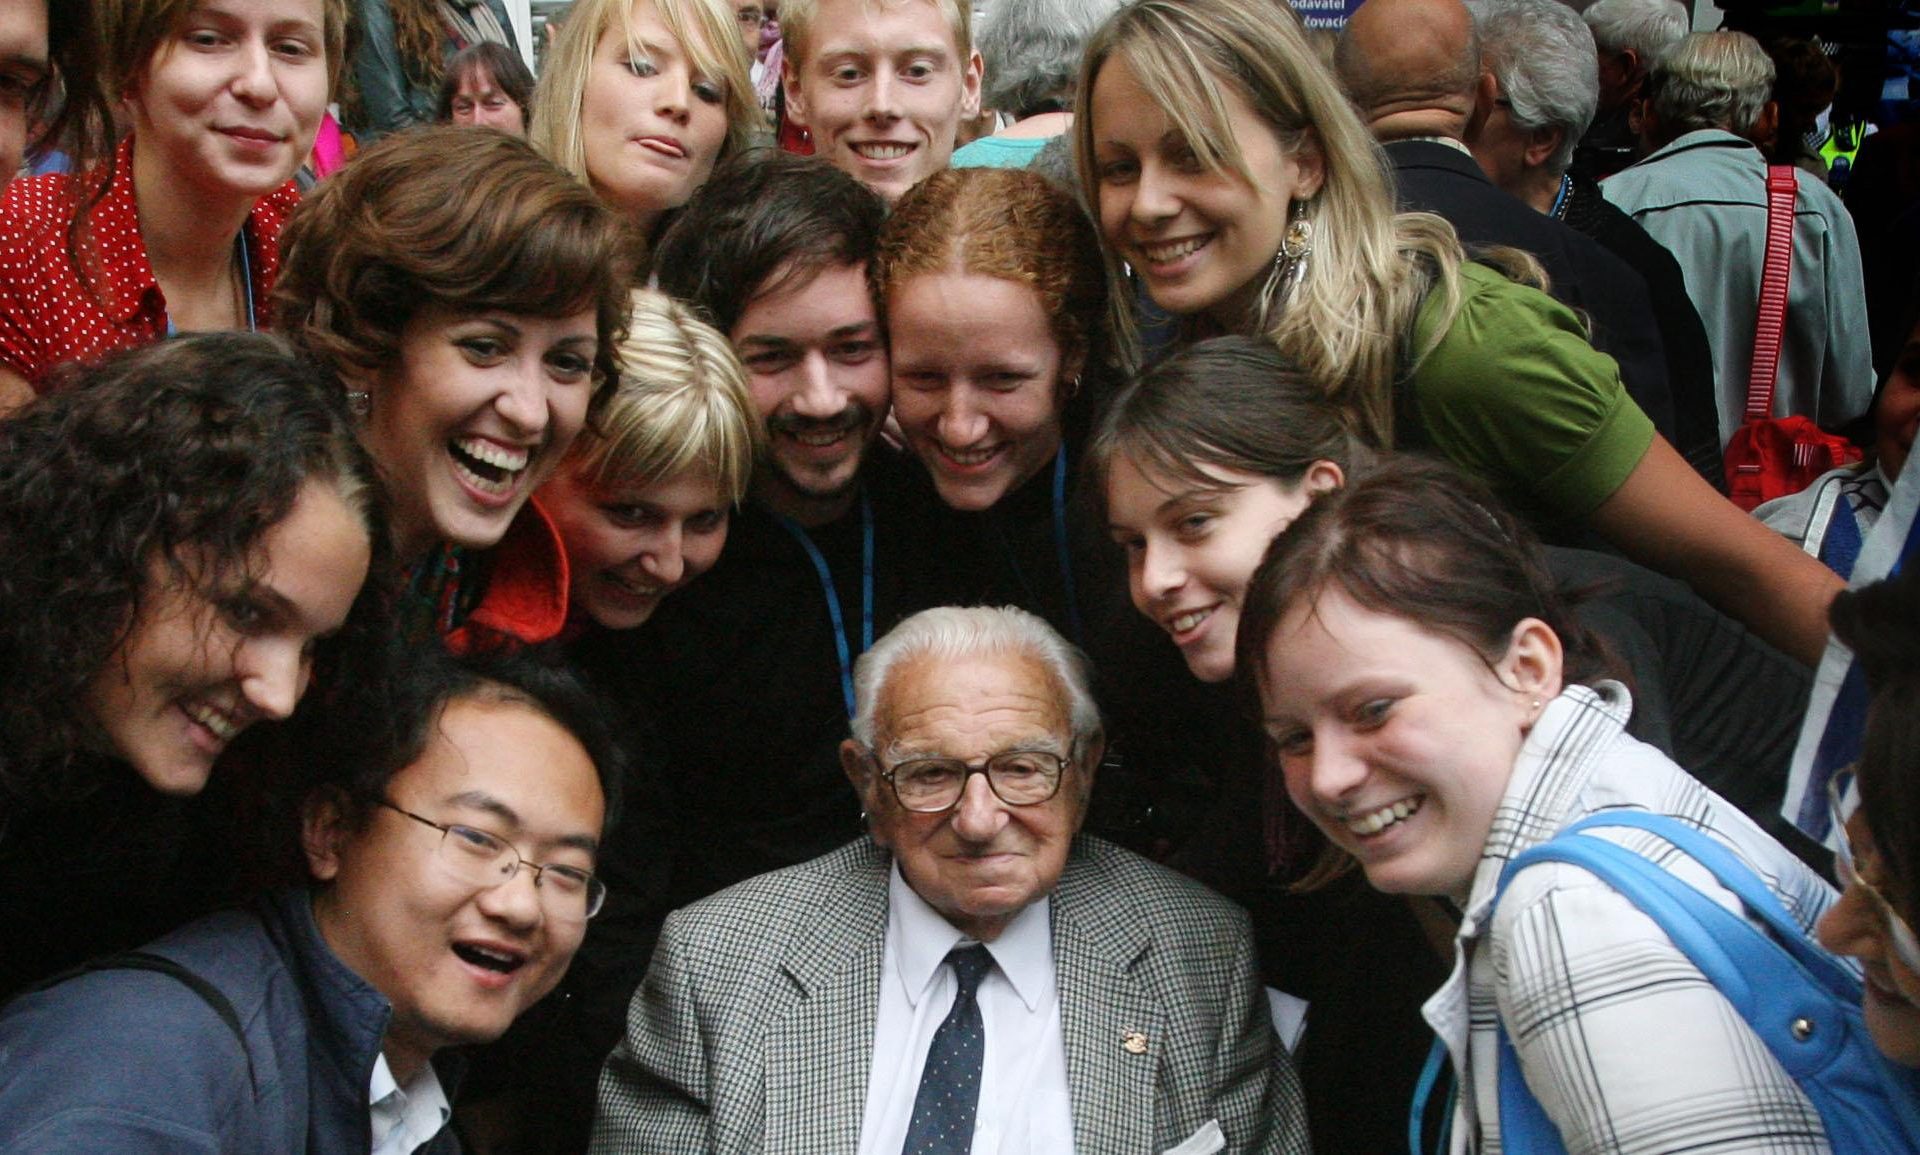 The story of Nicholas Winton, the 'British Schindler' who saved 700 children